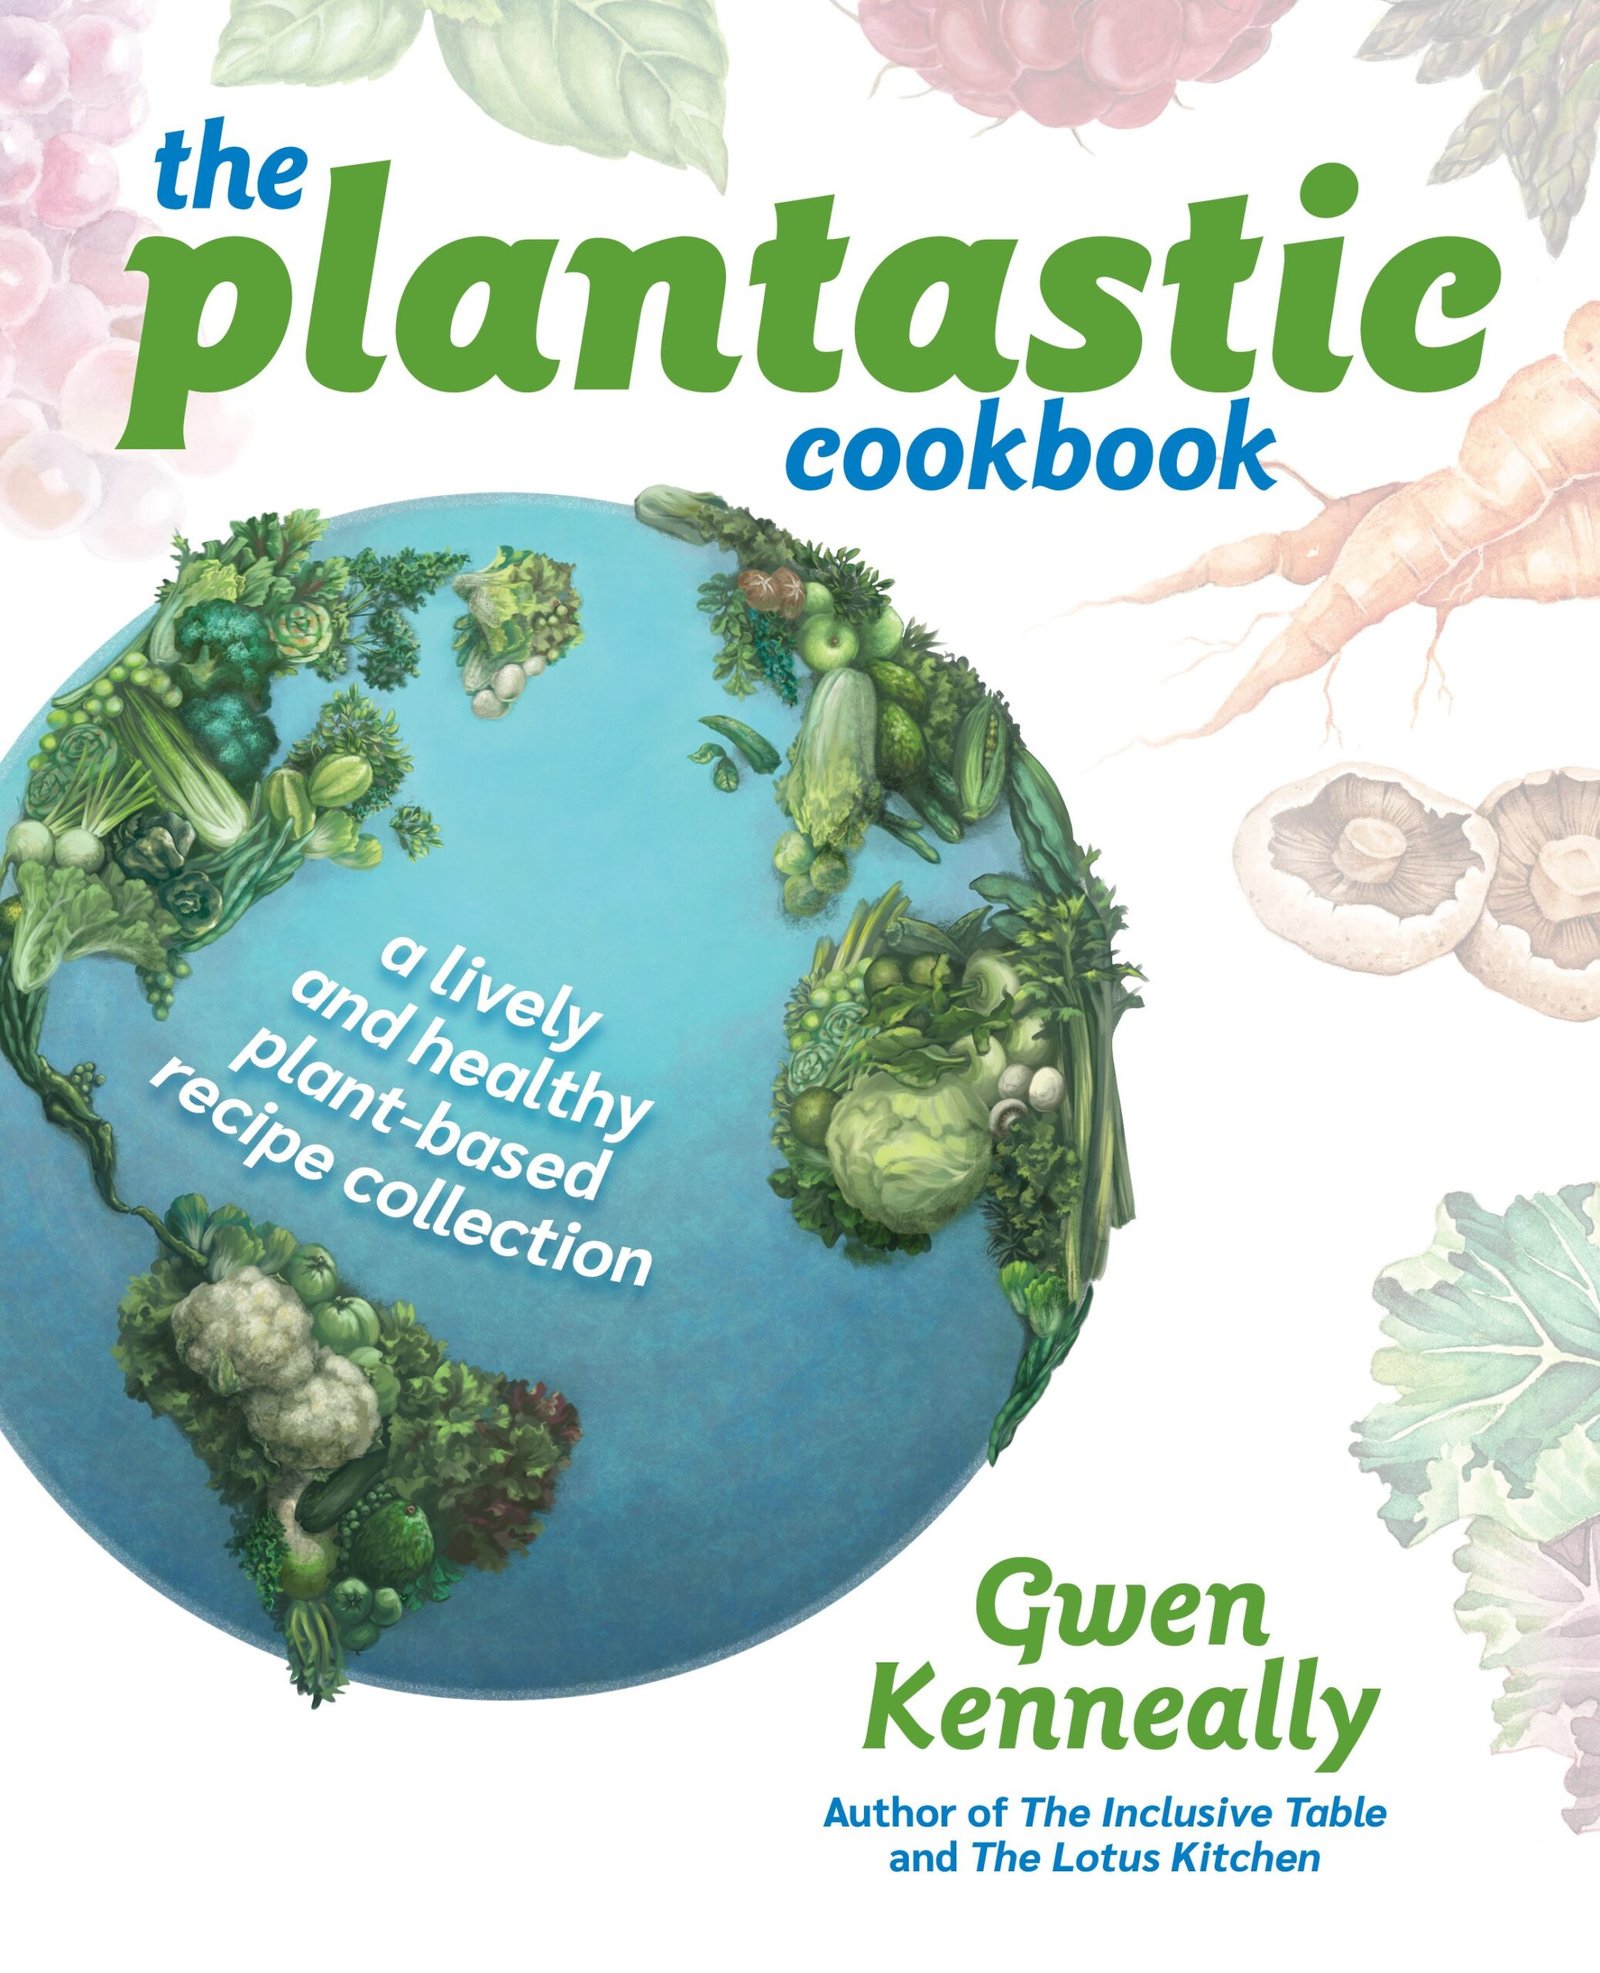 New Cookbook Creates a Lively and Fun Way to Think About Plant-based Cooking.